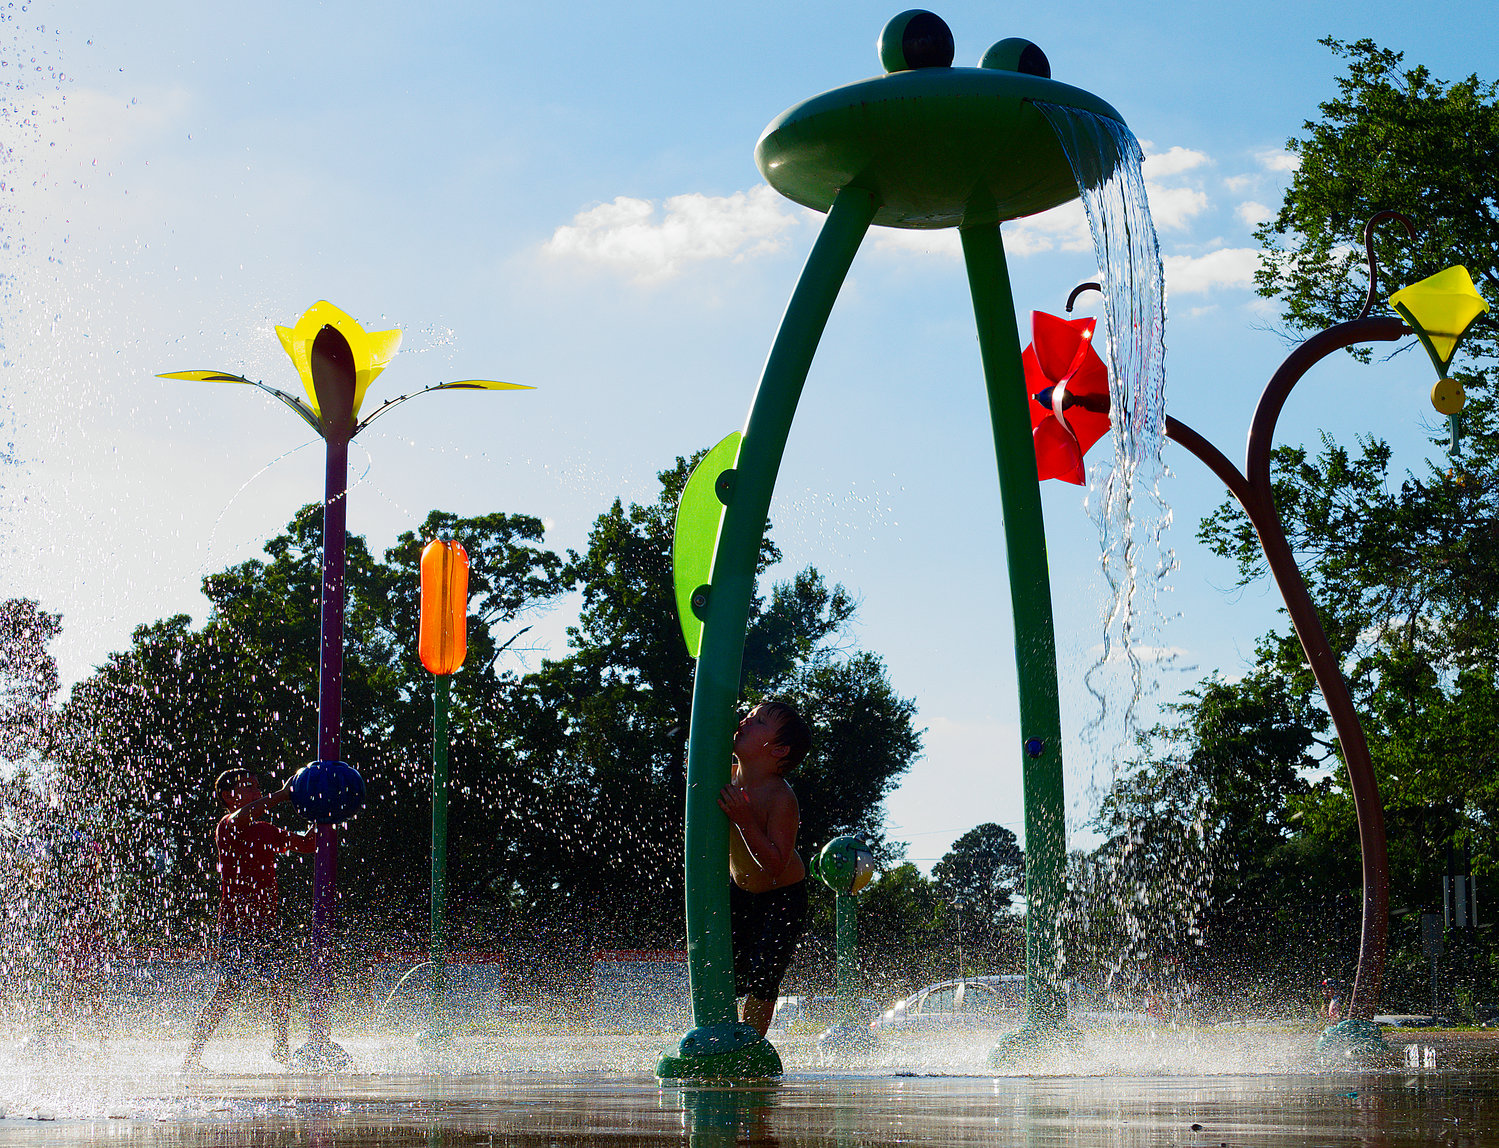 The recently-reopened splash pad at the Mineola Civic Center was a popular spot for the youngsters on the 4th of July.